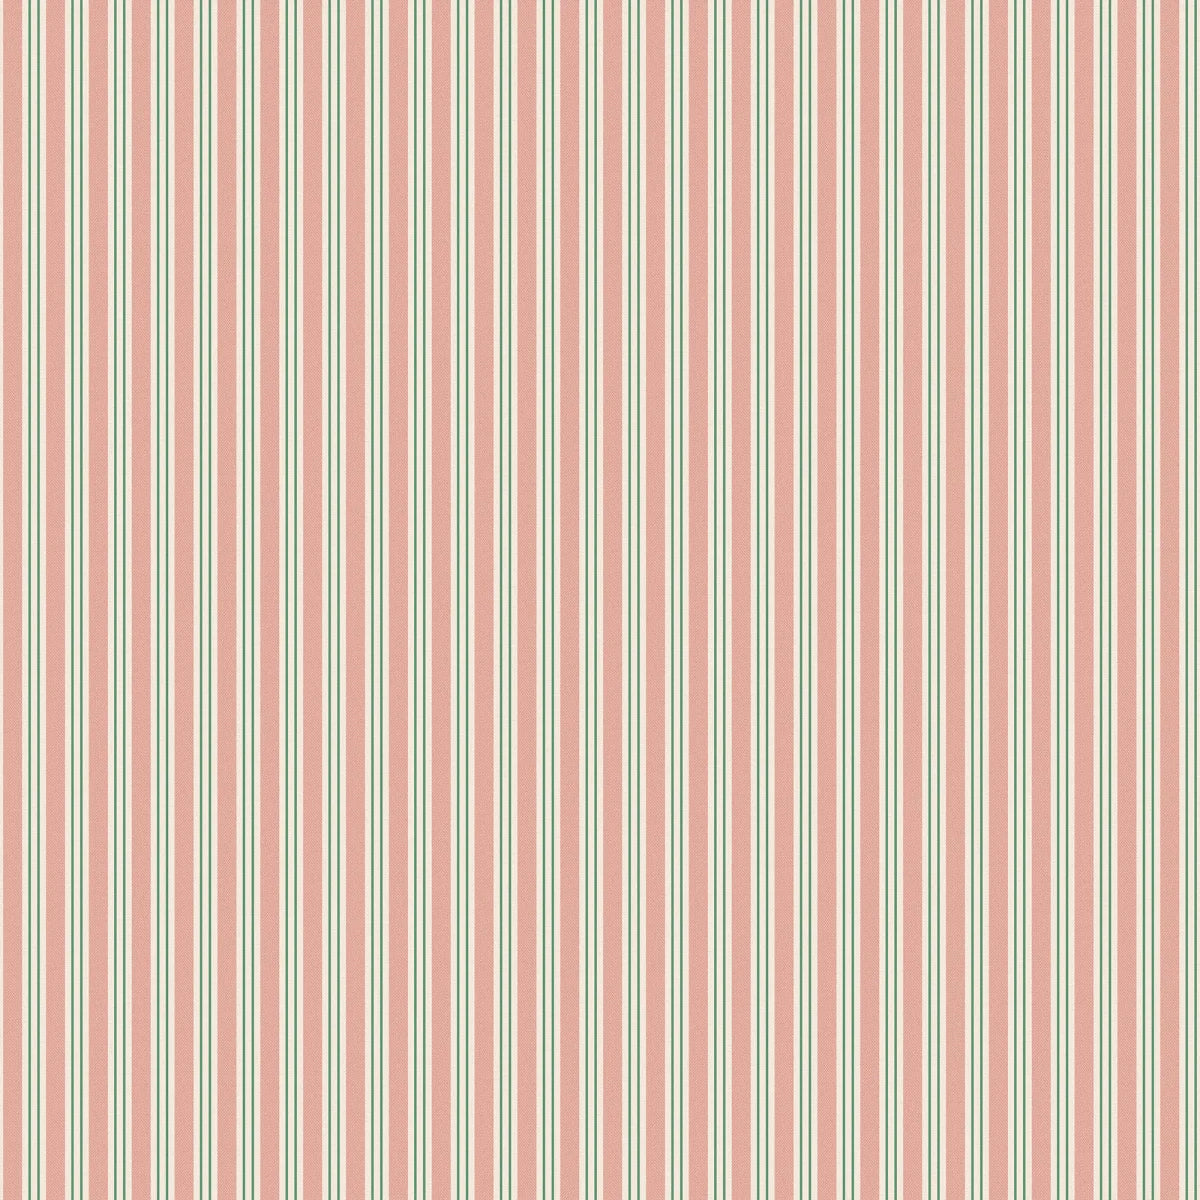 A cool striped wallpaper with a soft textile character in exclusive colors that dress the walls both luxuriously and stylishly.